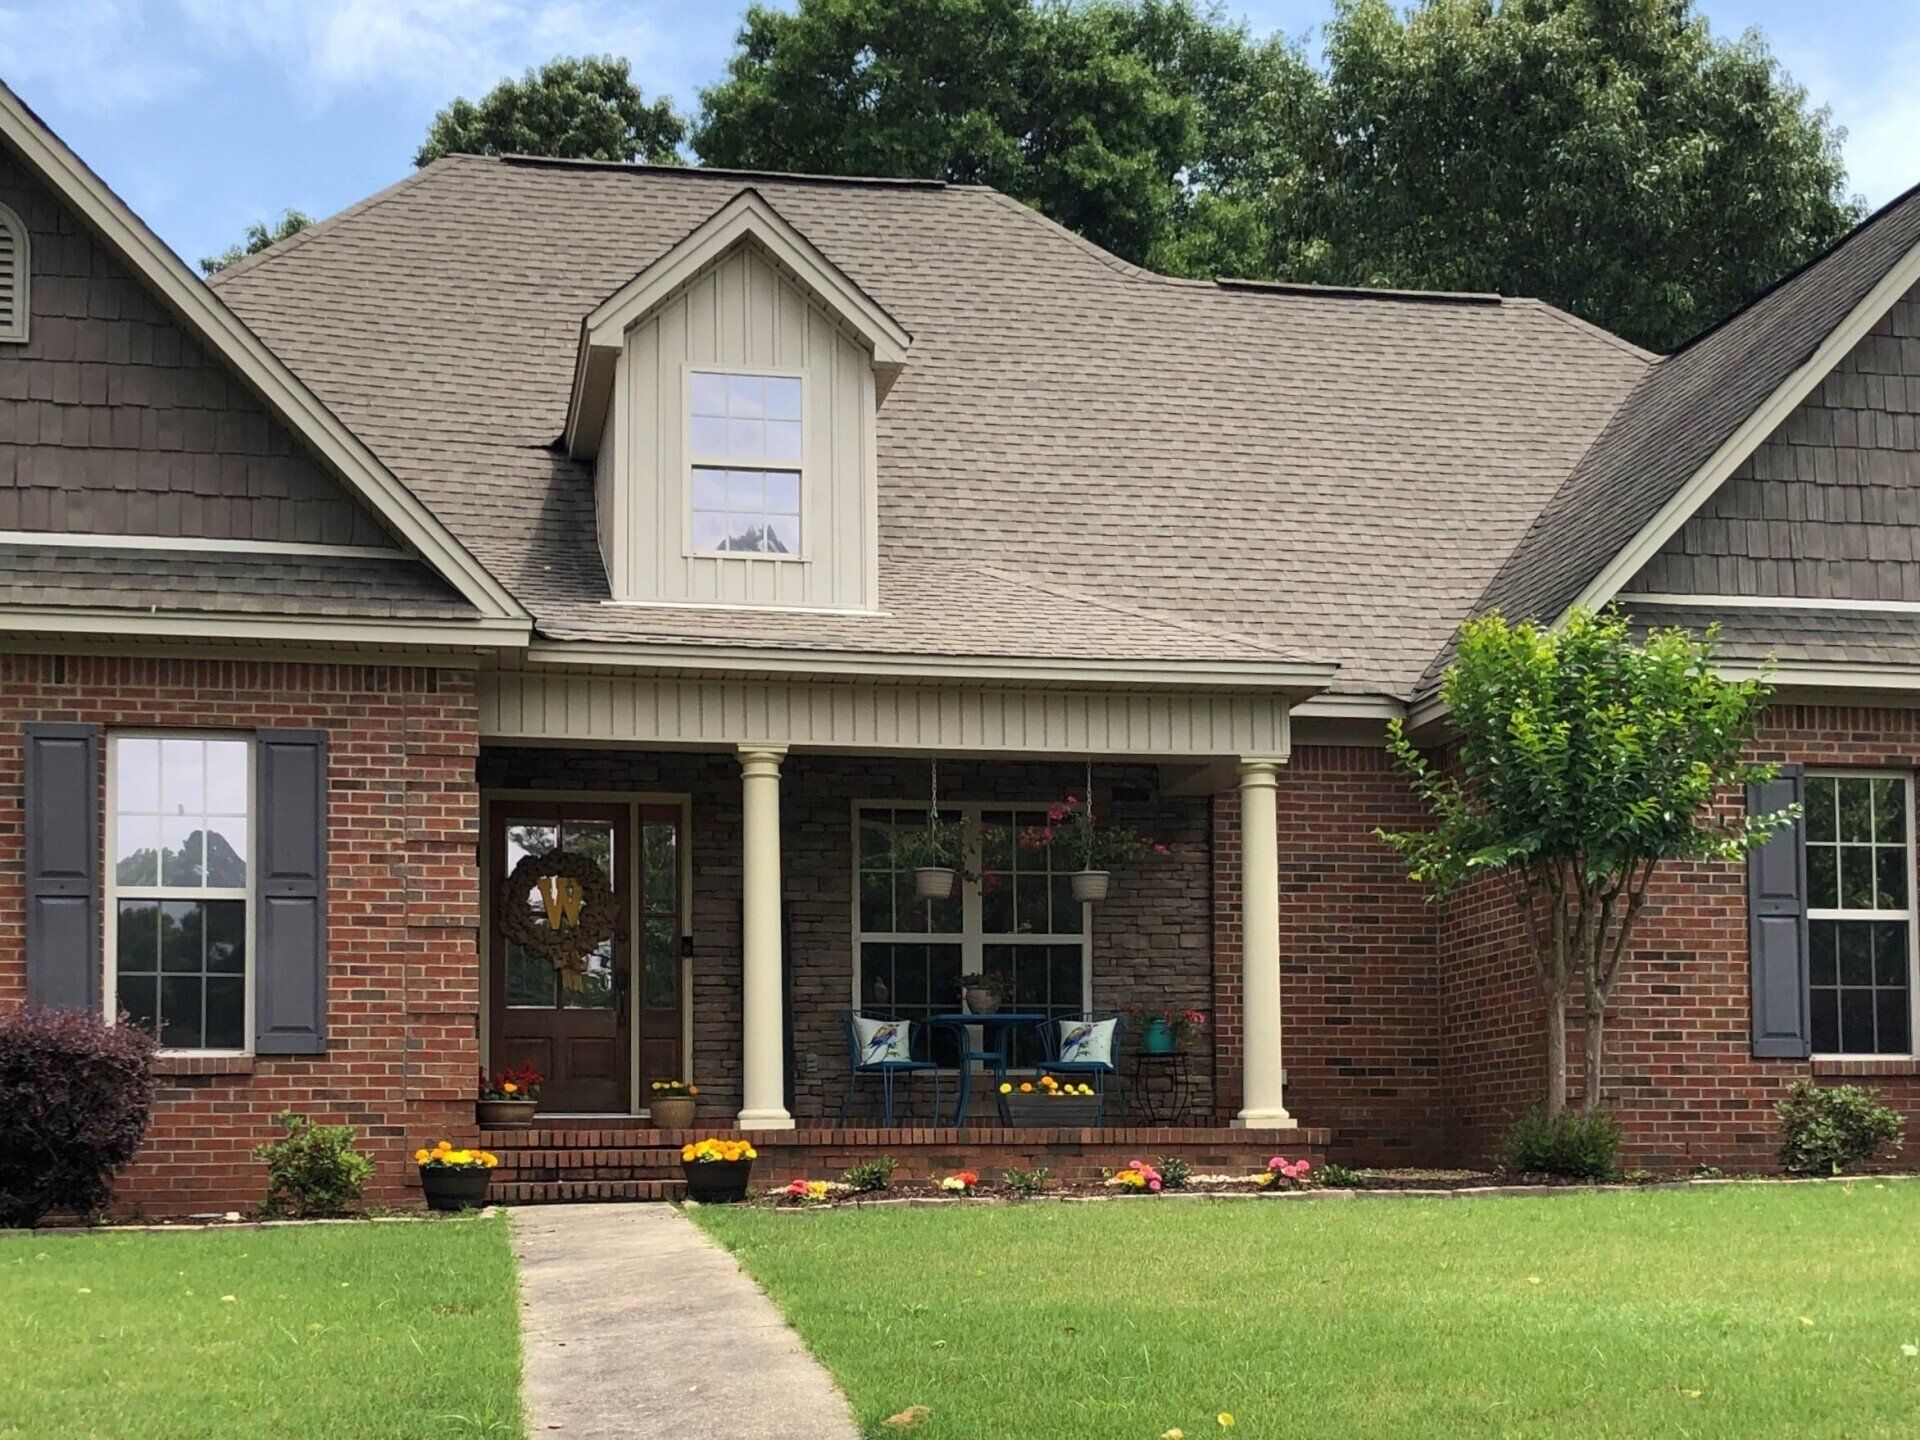 lower power costs with SPF Residential Tint - SPF Residential Tint Blocking Bright Sun & Temperature Fluctuation from room to room. Inside this home in Prattville, AL